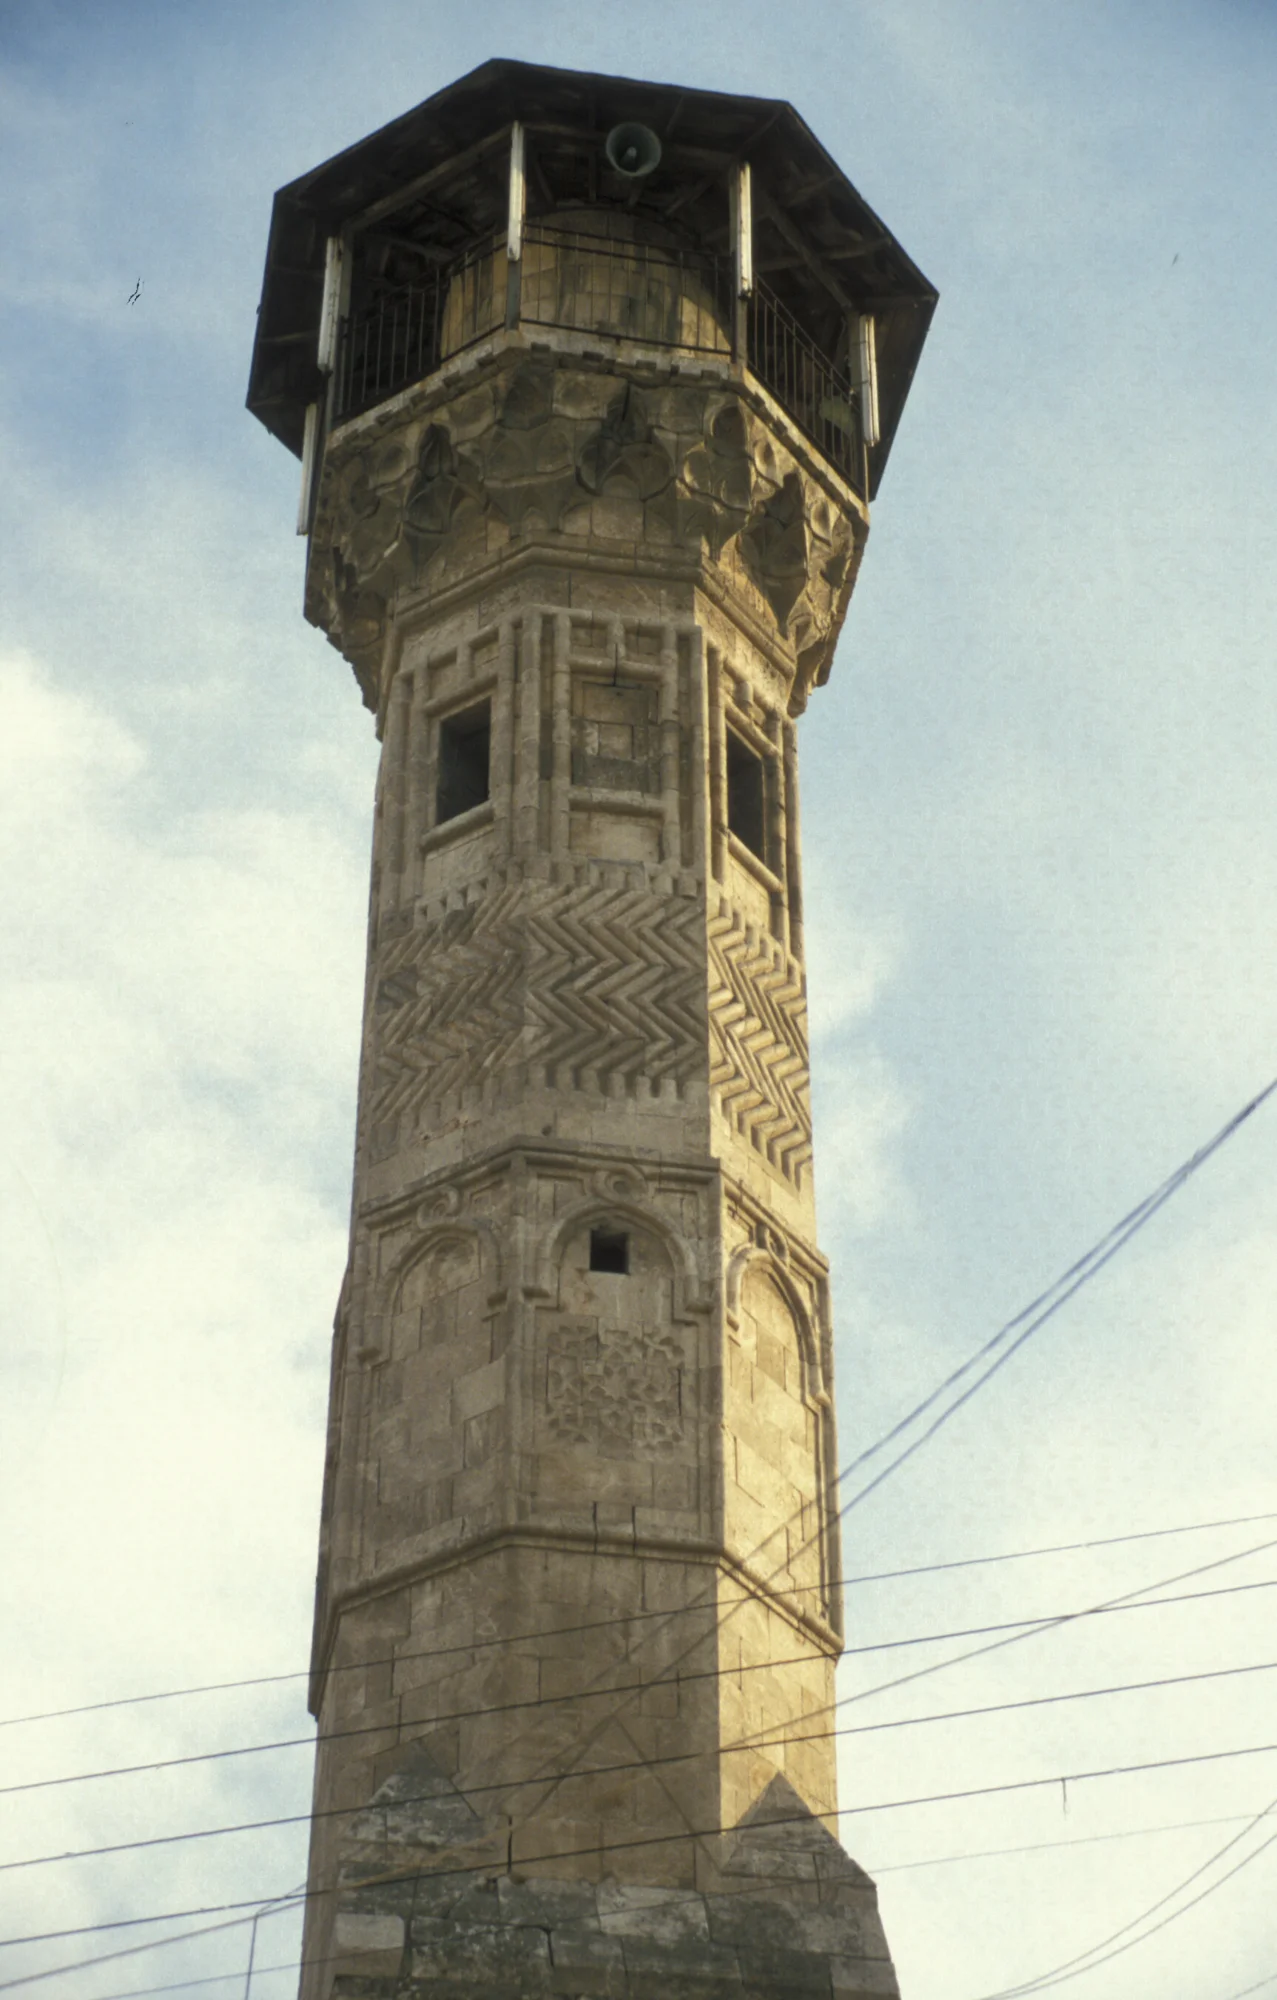 The octagonal minaret of the Mamluk Jamiʿ as-Saffahiyya with rich architectural decoration